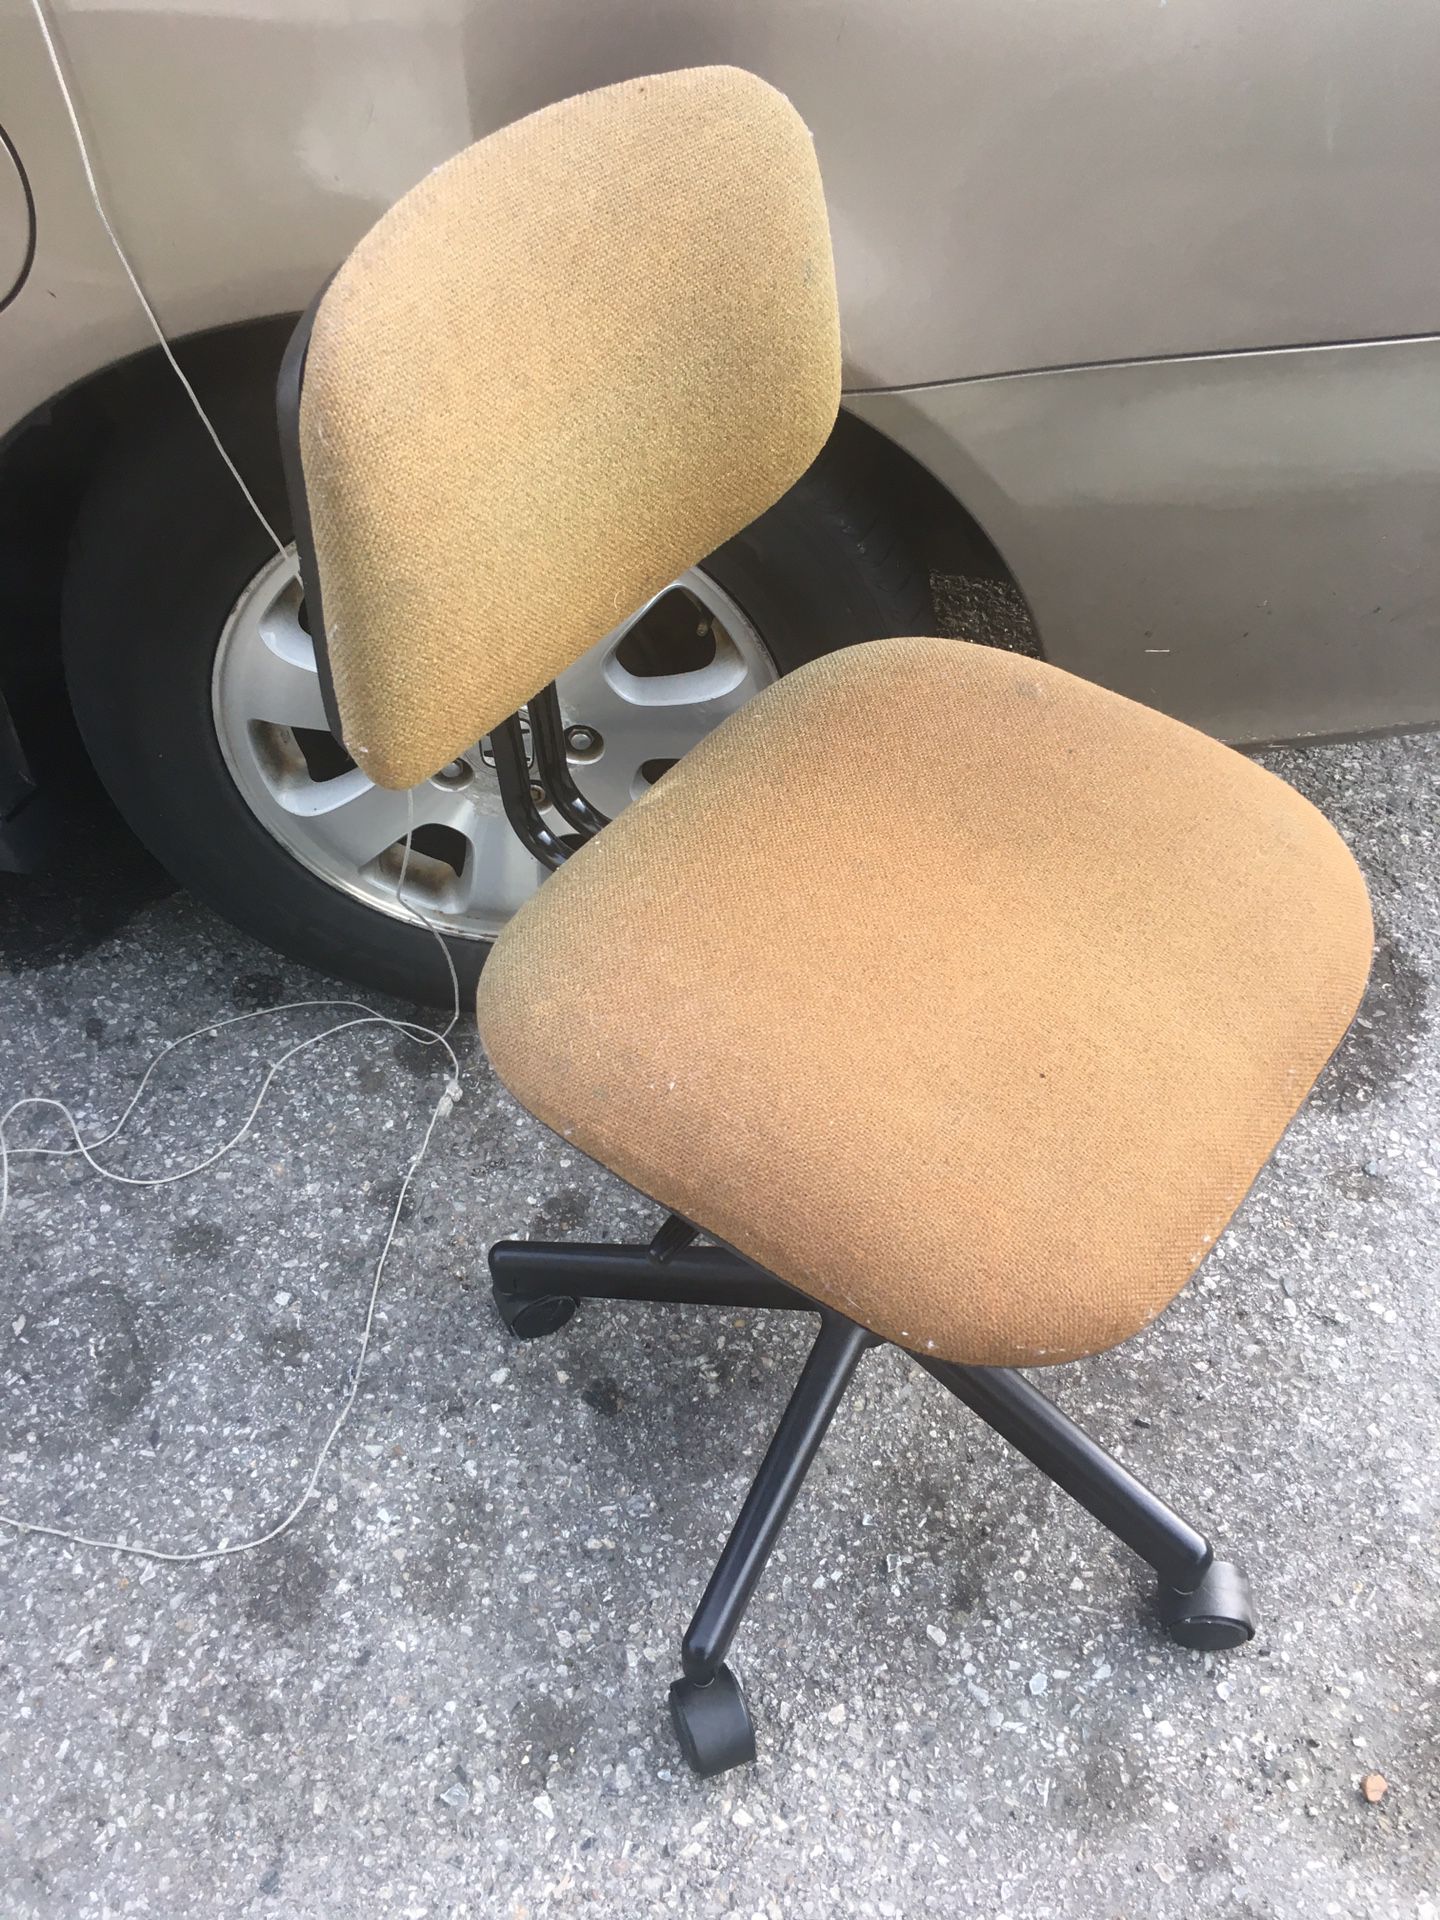 Nice adjustable desk chair on wheels only $15